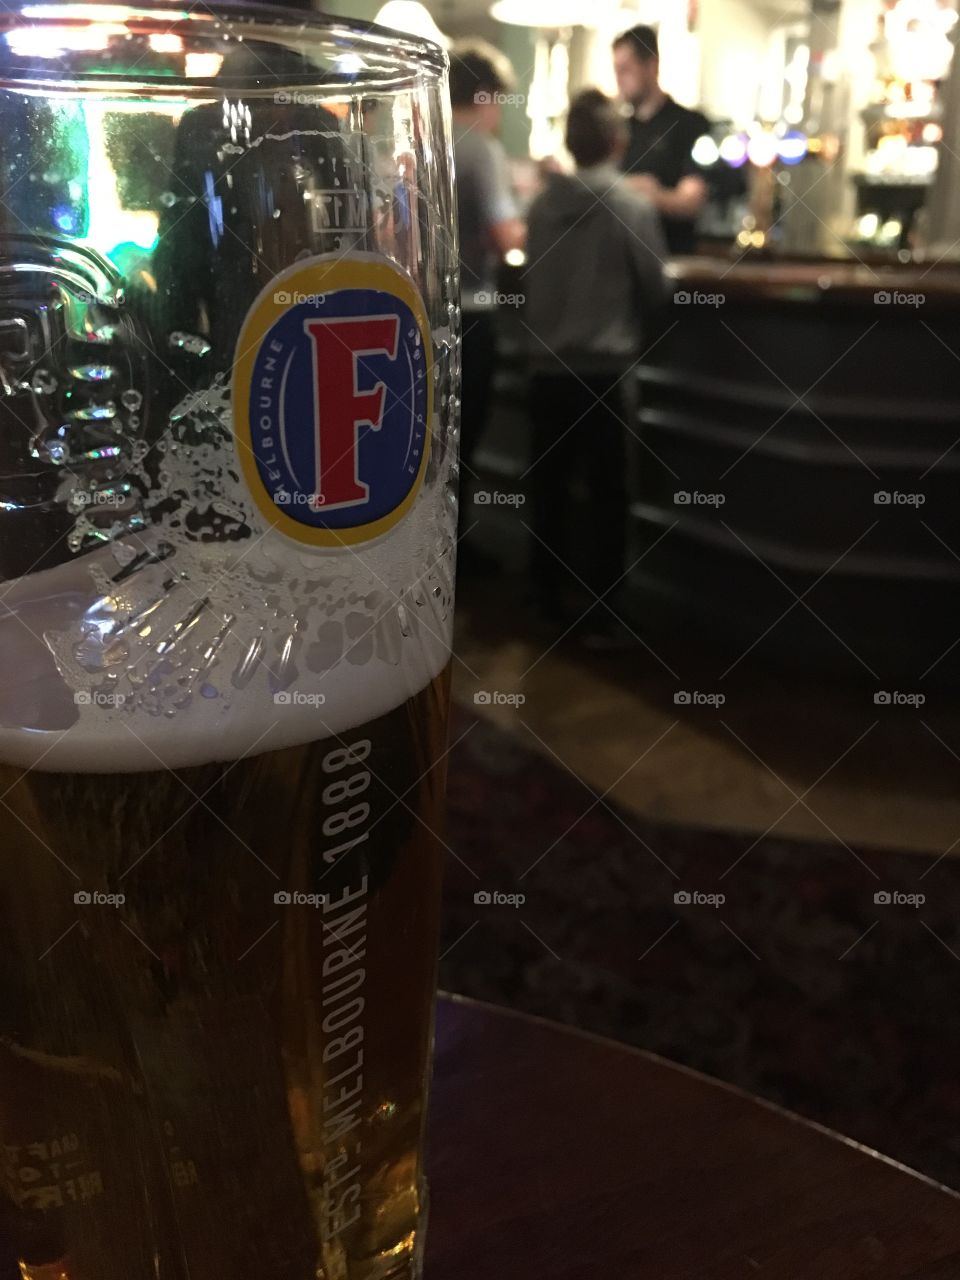 Fosters Anyone